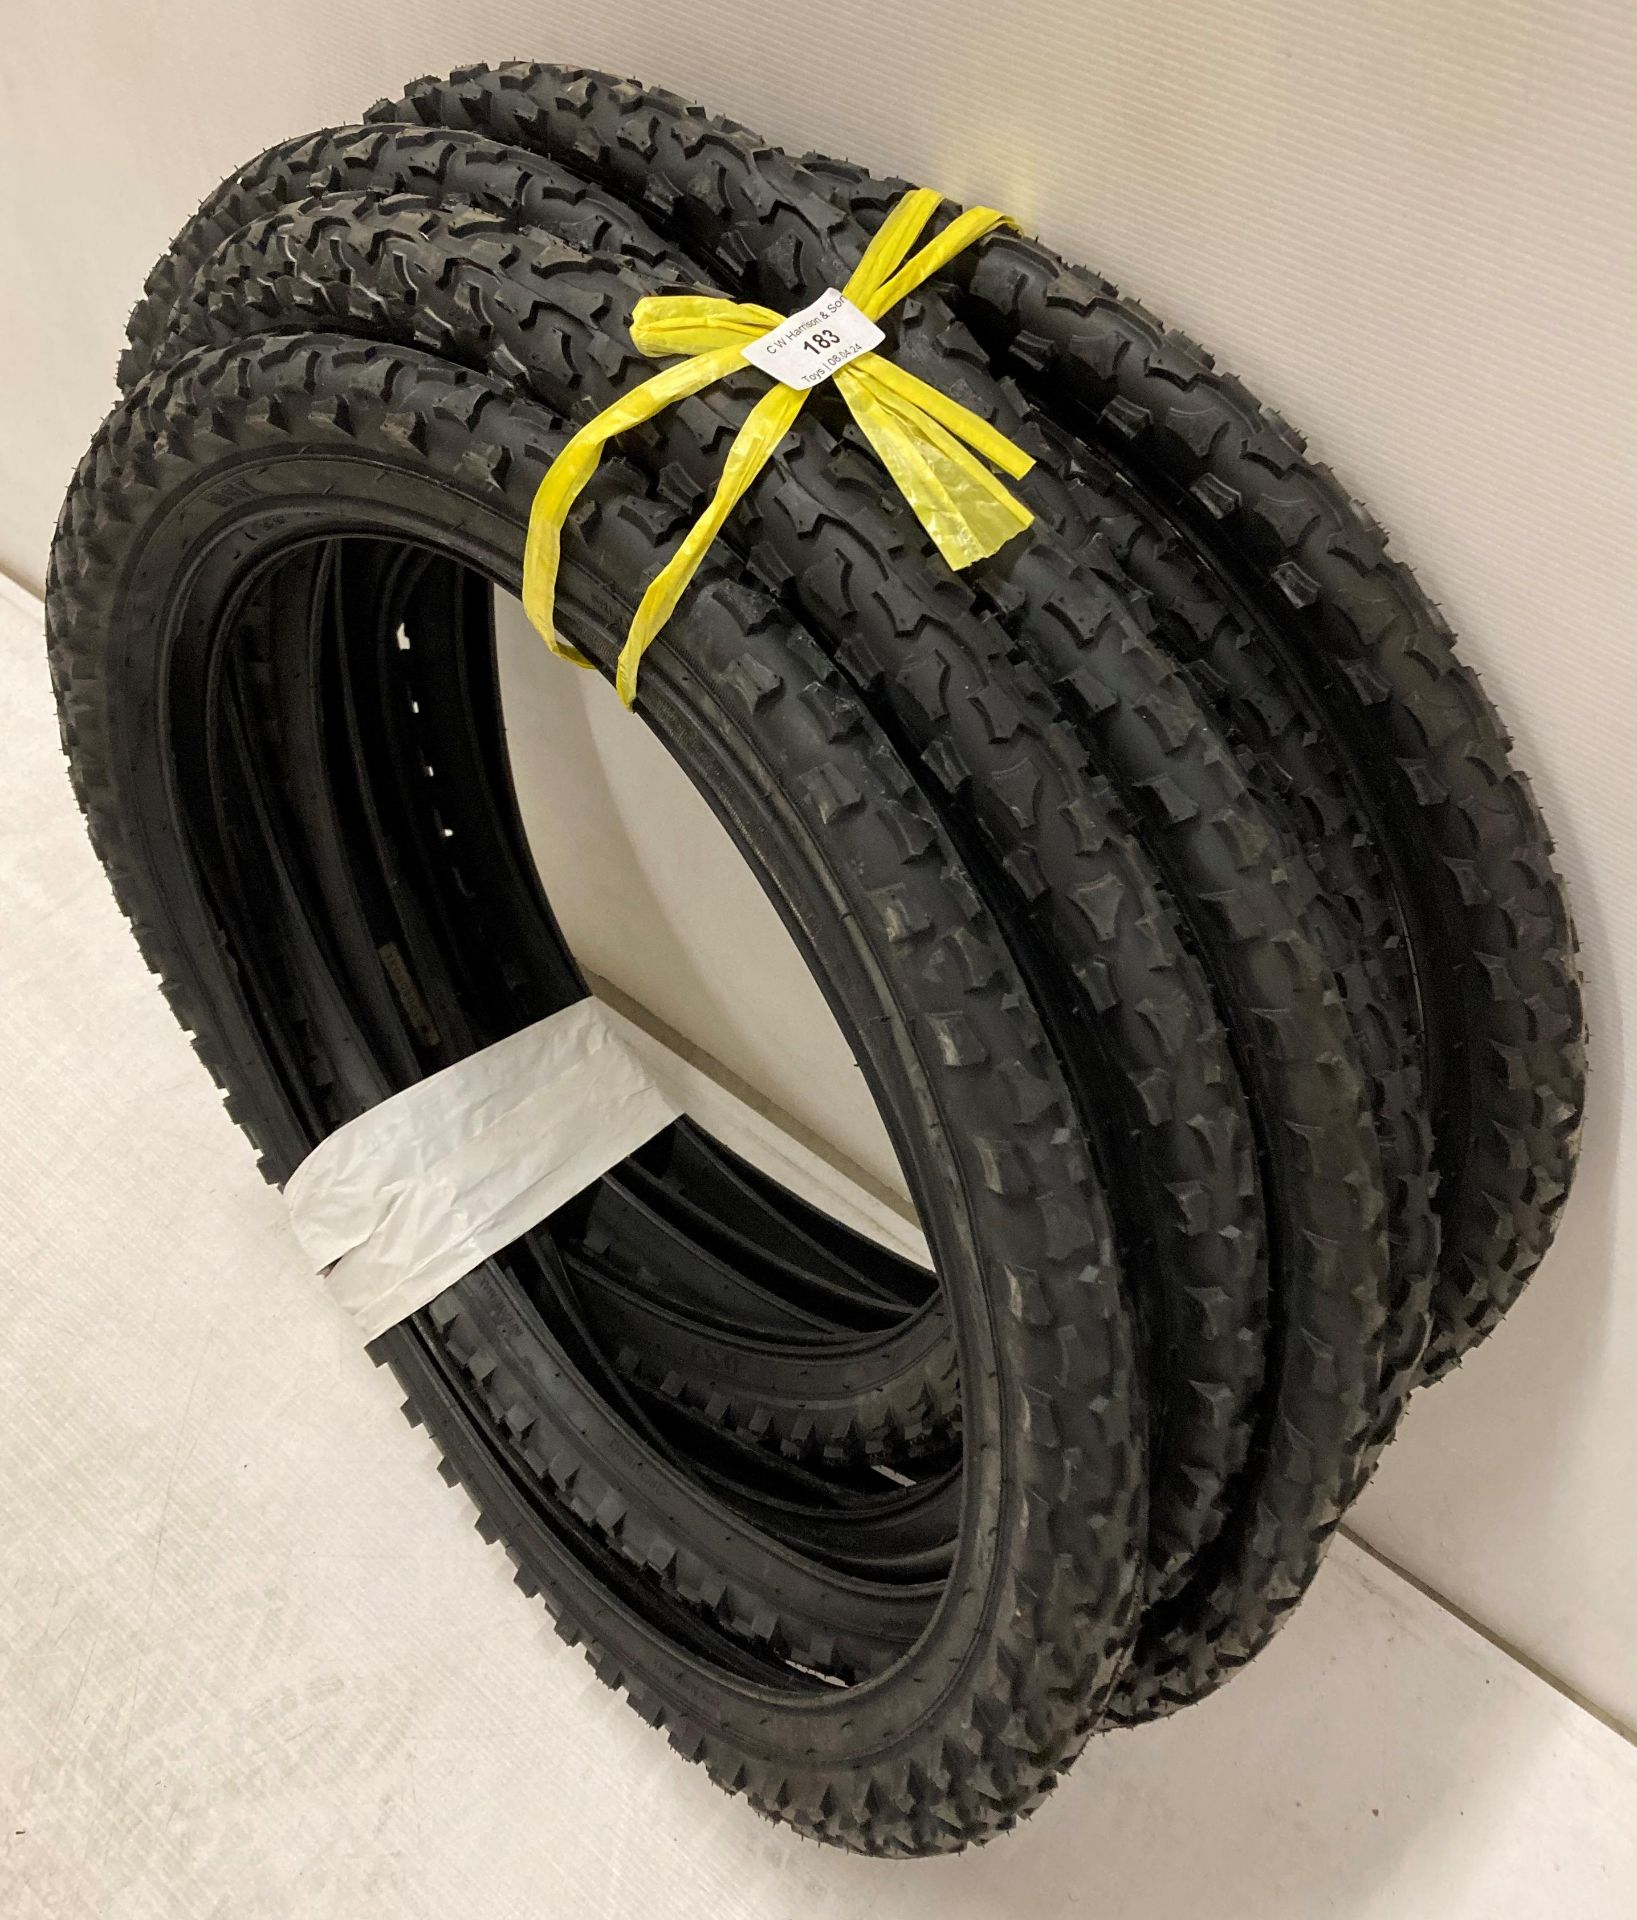 10 x Rotation cycle tyres 50/507 (24 x 190) (saleroom location: M07) - Image 2 of 2